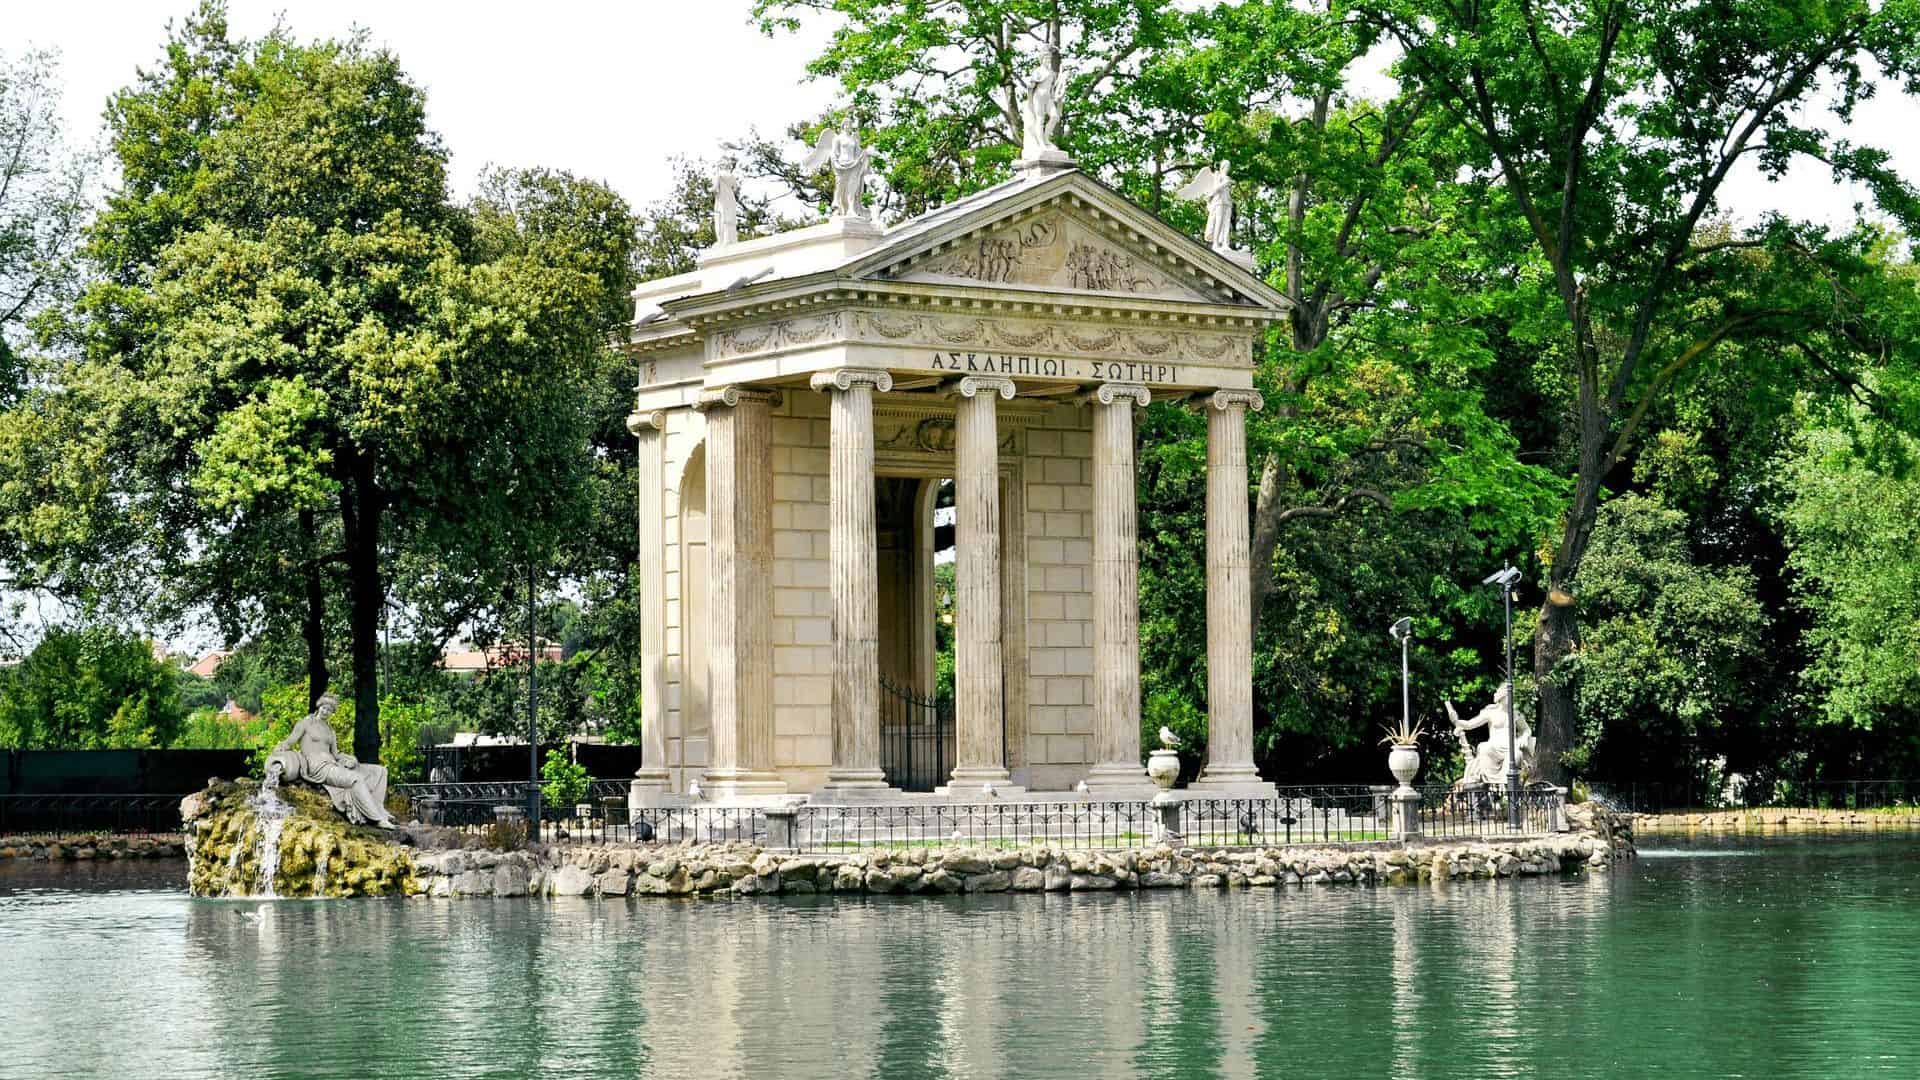 The Temple of Asclepius at Villa Borghese in Rome